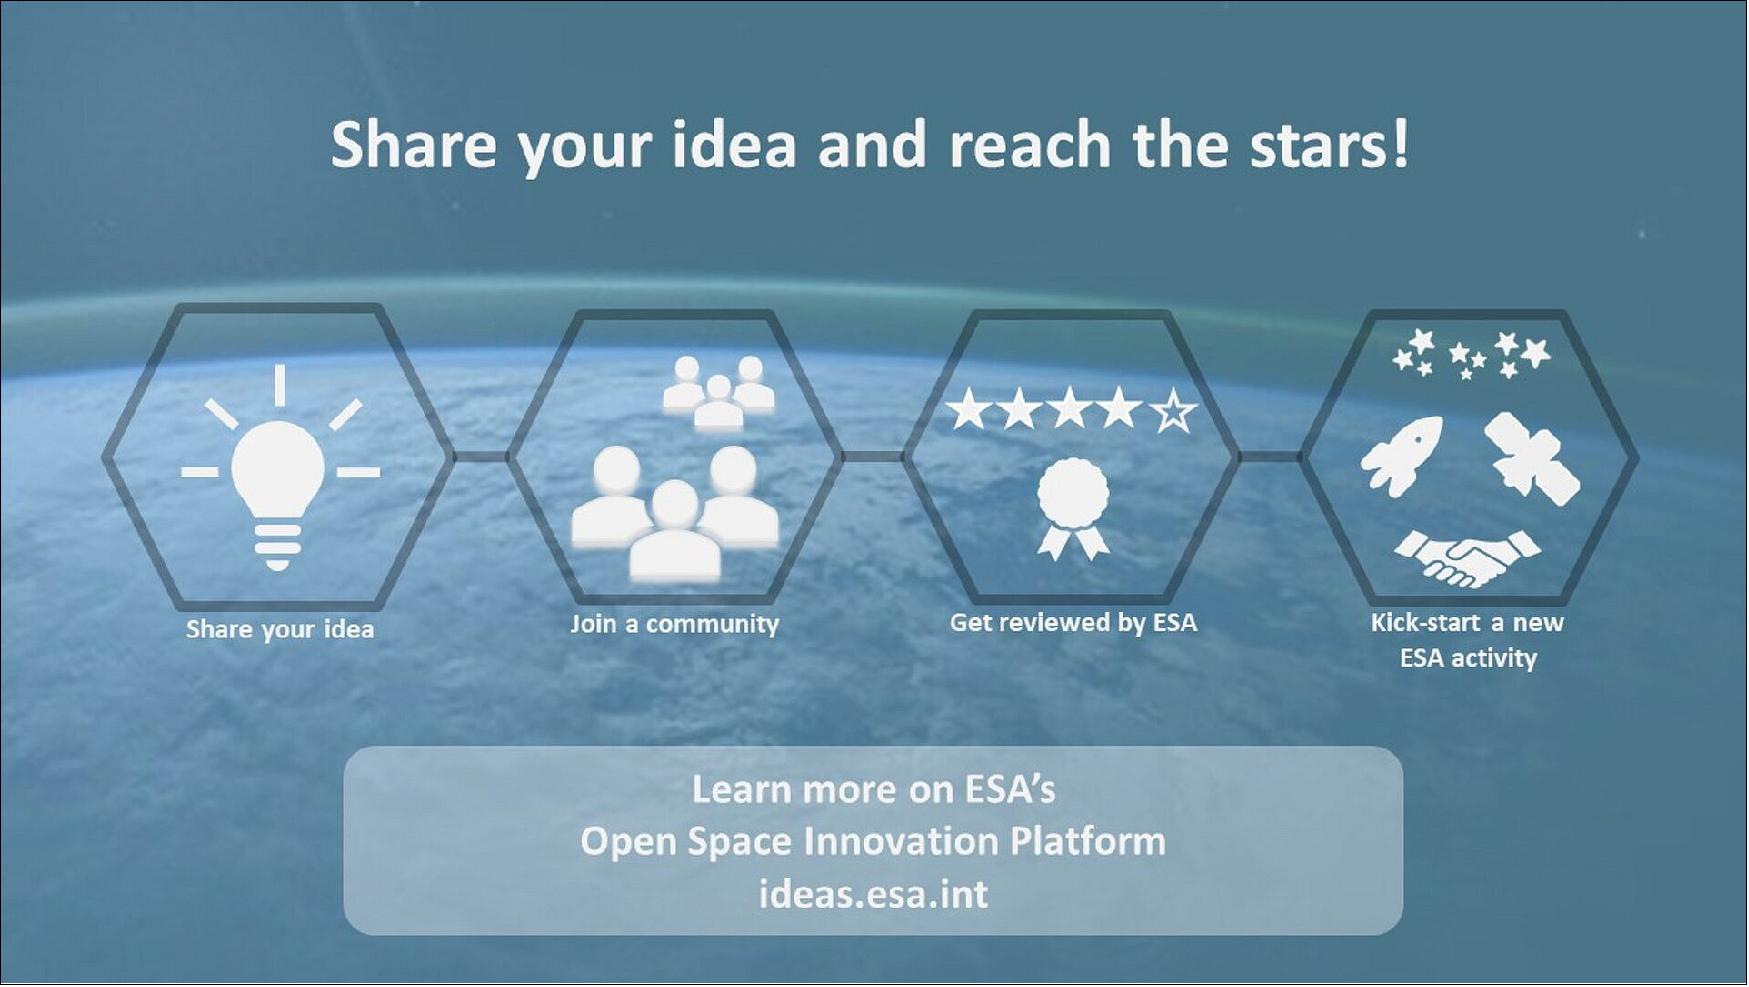 Figure 17: The Open Space Innovation Platform. ESA's OSIP takes that form of a website that enables the submission of novel ideas for space technology and applications. Anybody is welcome to submit ideas through OSIP. The platform supports individuals who wish to contribute to European space research and interact with space industry experts. It also encourages ideas from legal entities interested in interacting with ESA and gaining funding or support for new research activities (image credit: ESA)